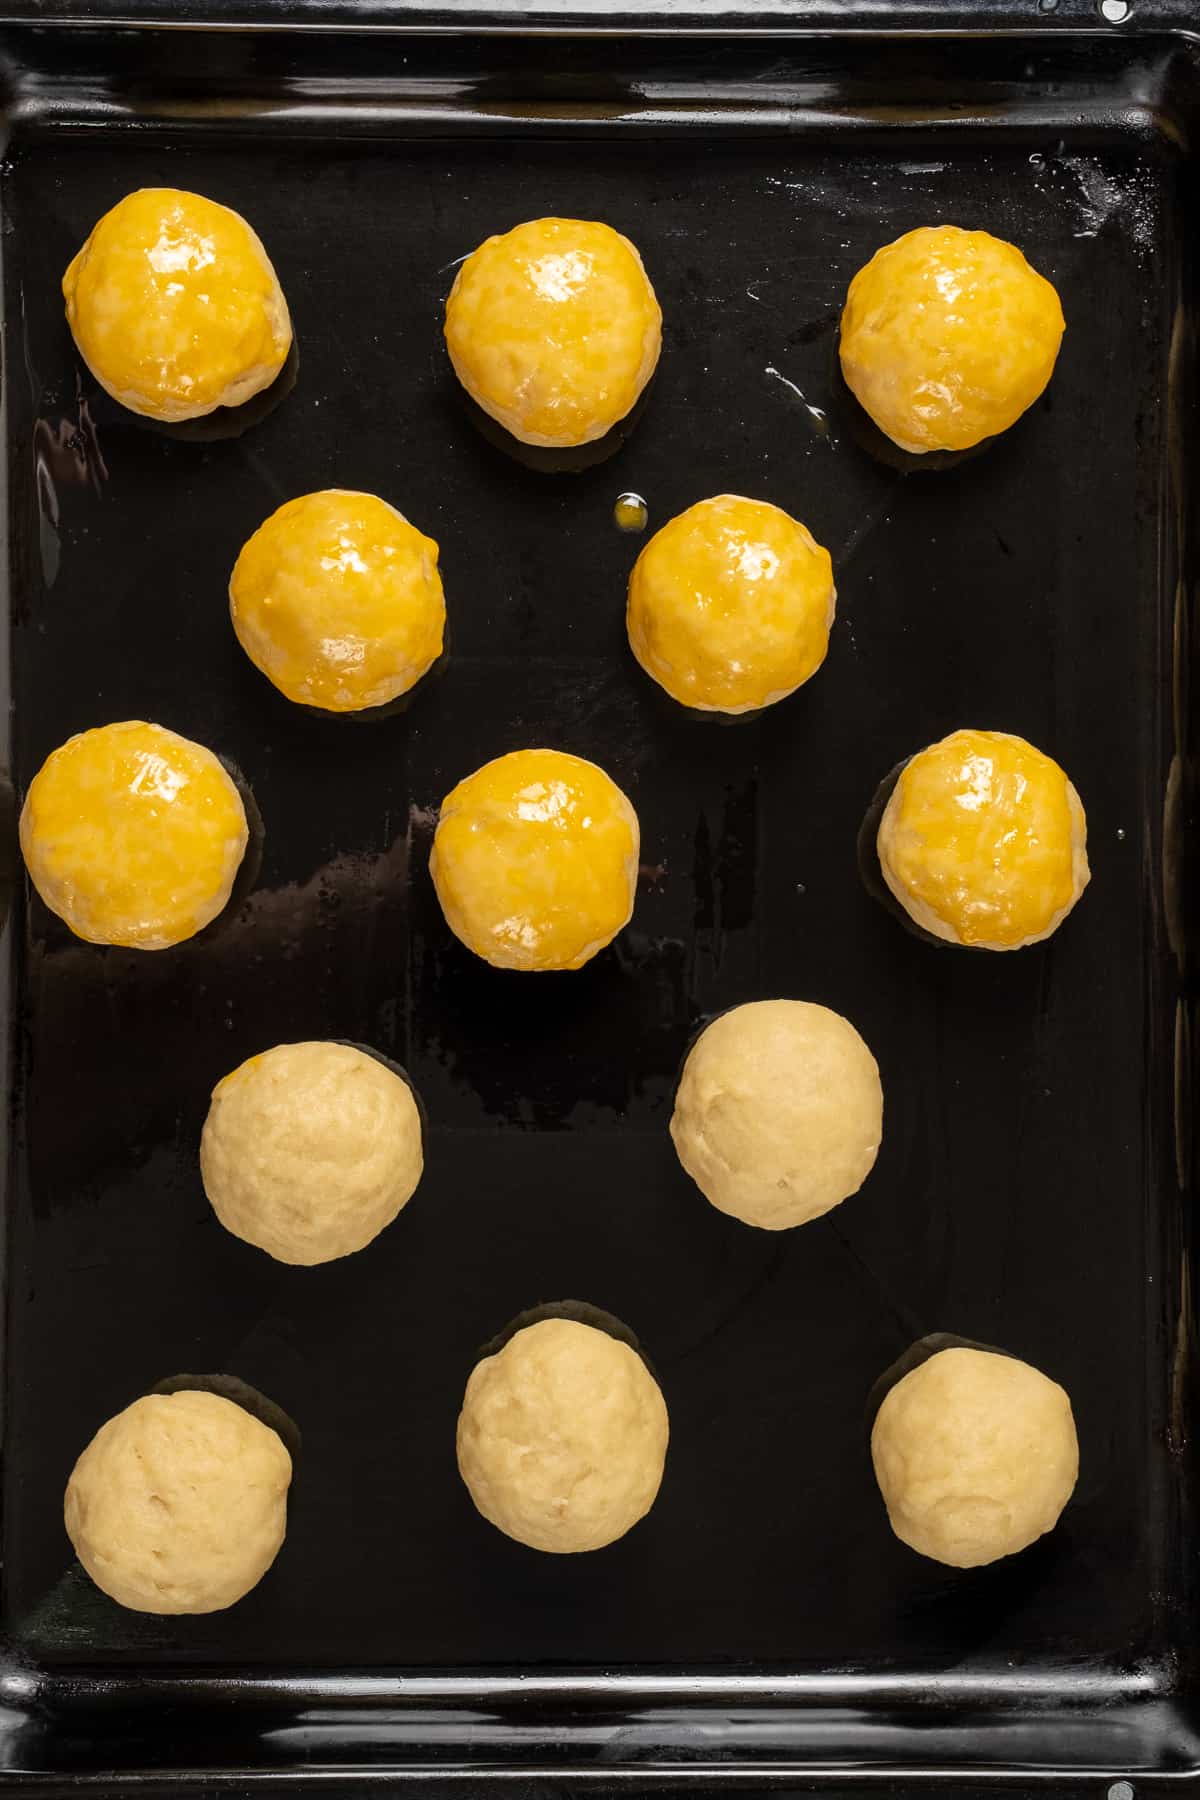 Dough balls on a greased baking sheet, half of them brushed with egg yolk.